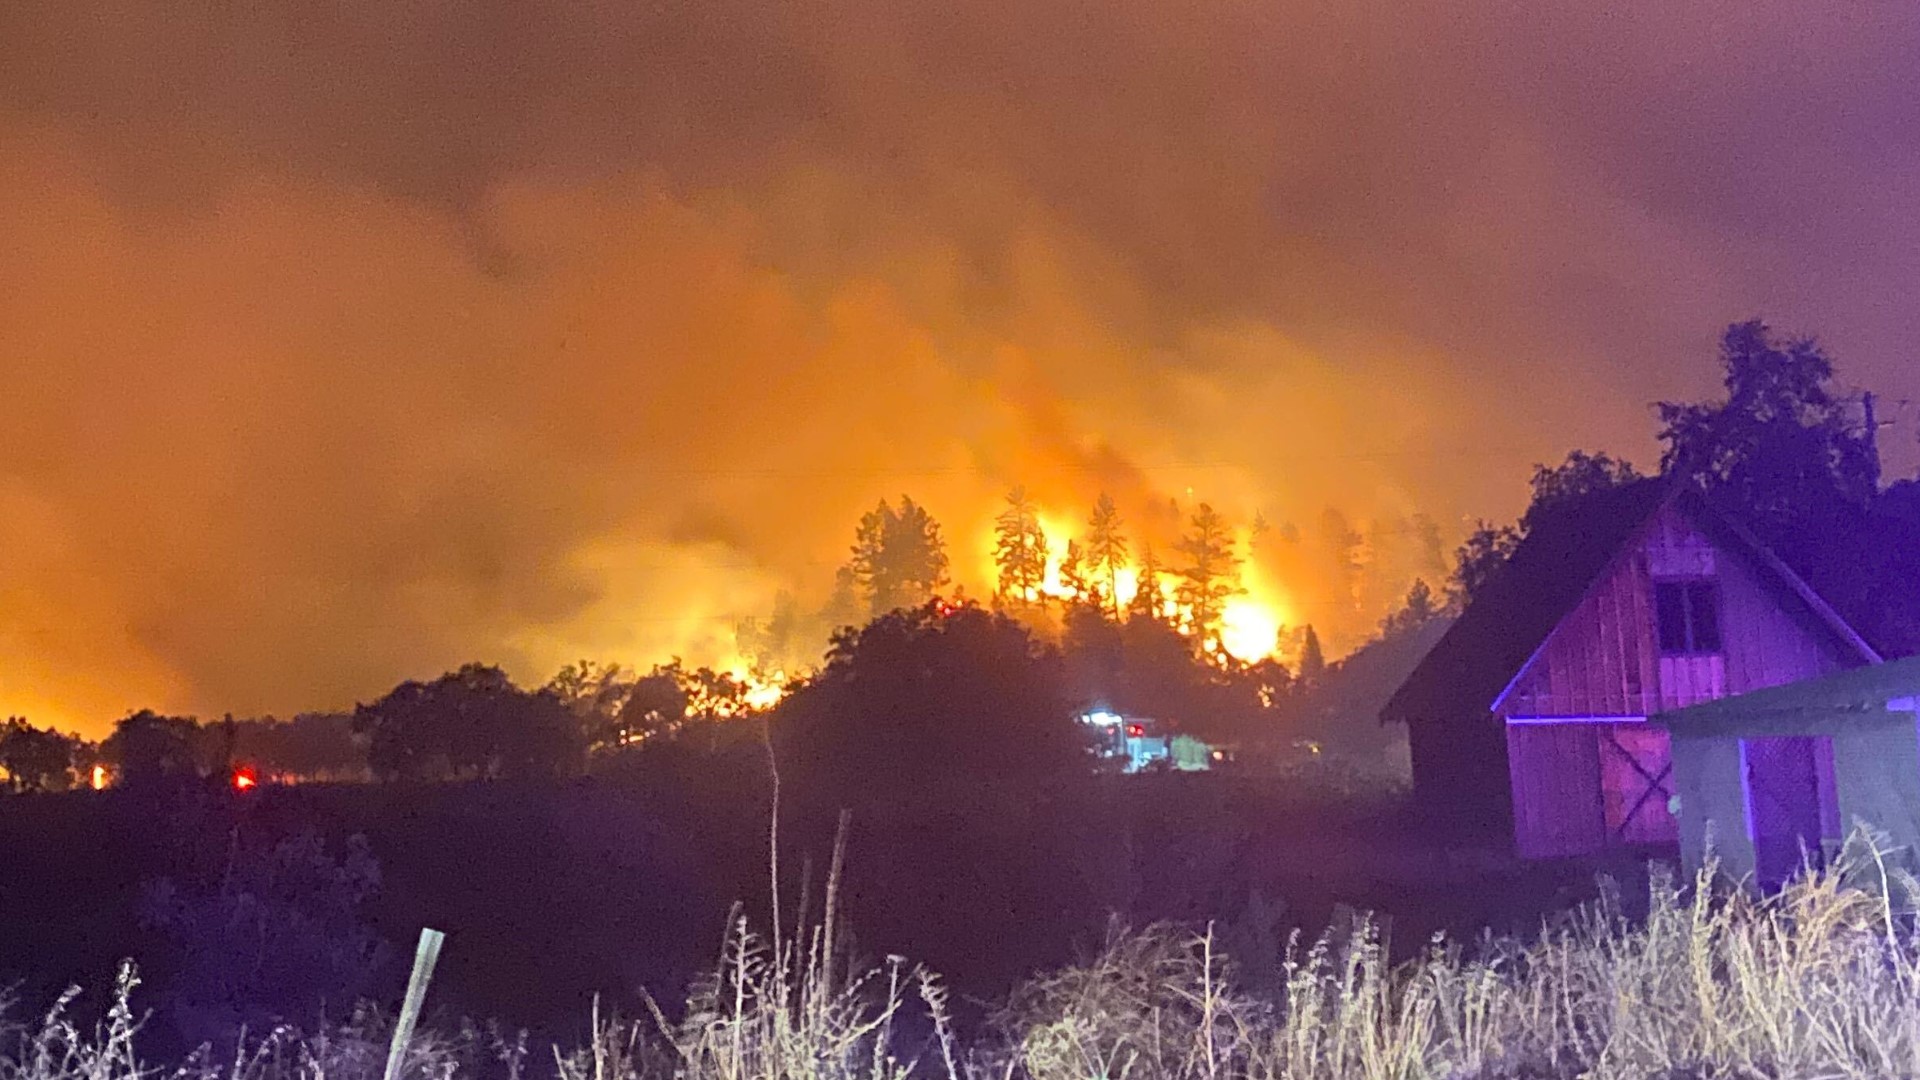 The Zogg Fire, North Complex West Zone Fire, and Glass Fire have brought mandatory evacuations to Butte, Sonoma, Napa, and Shasta Counties.